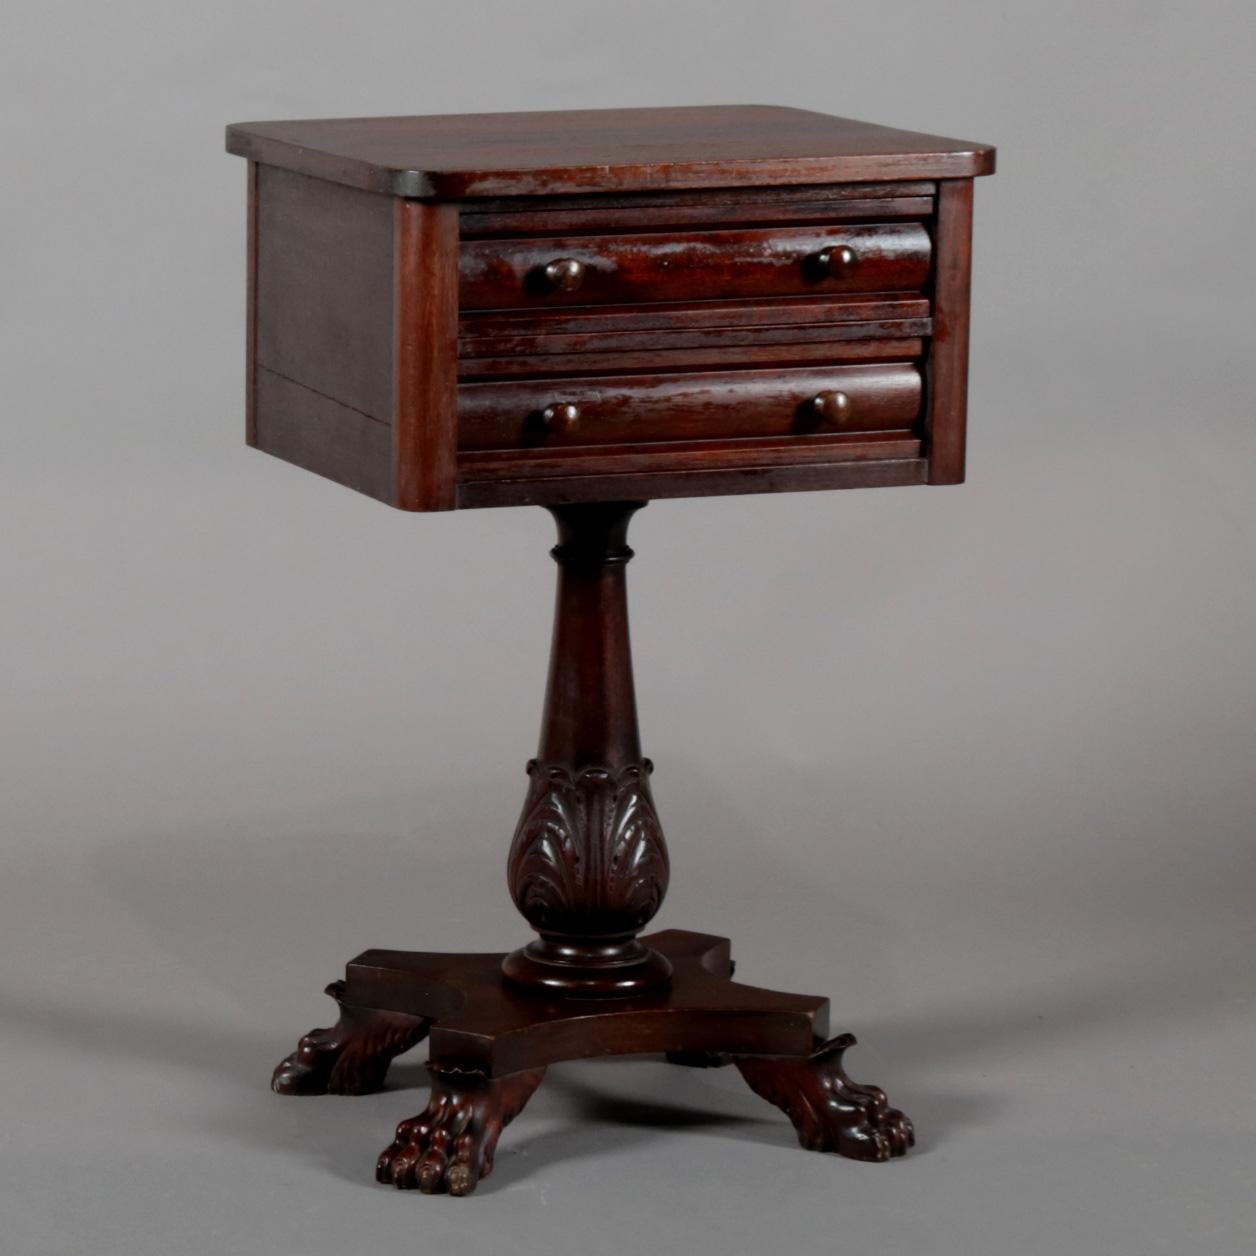 An antique American Empire side stand features mahogany construction with case having two convex drawers surmounting turned and acanthus carved column raised on base with carved paw feet, circa 1870

Measures: 28.5